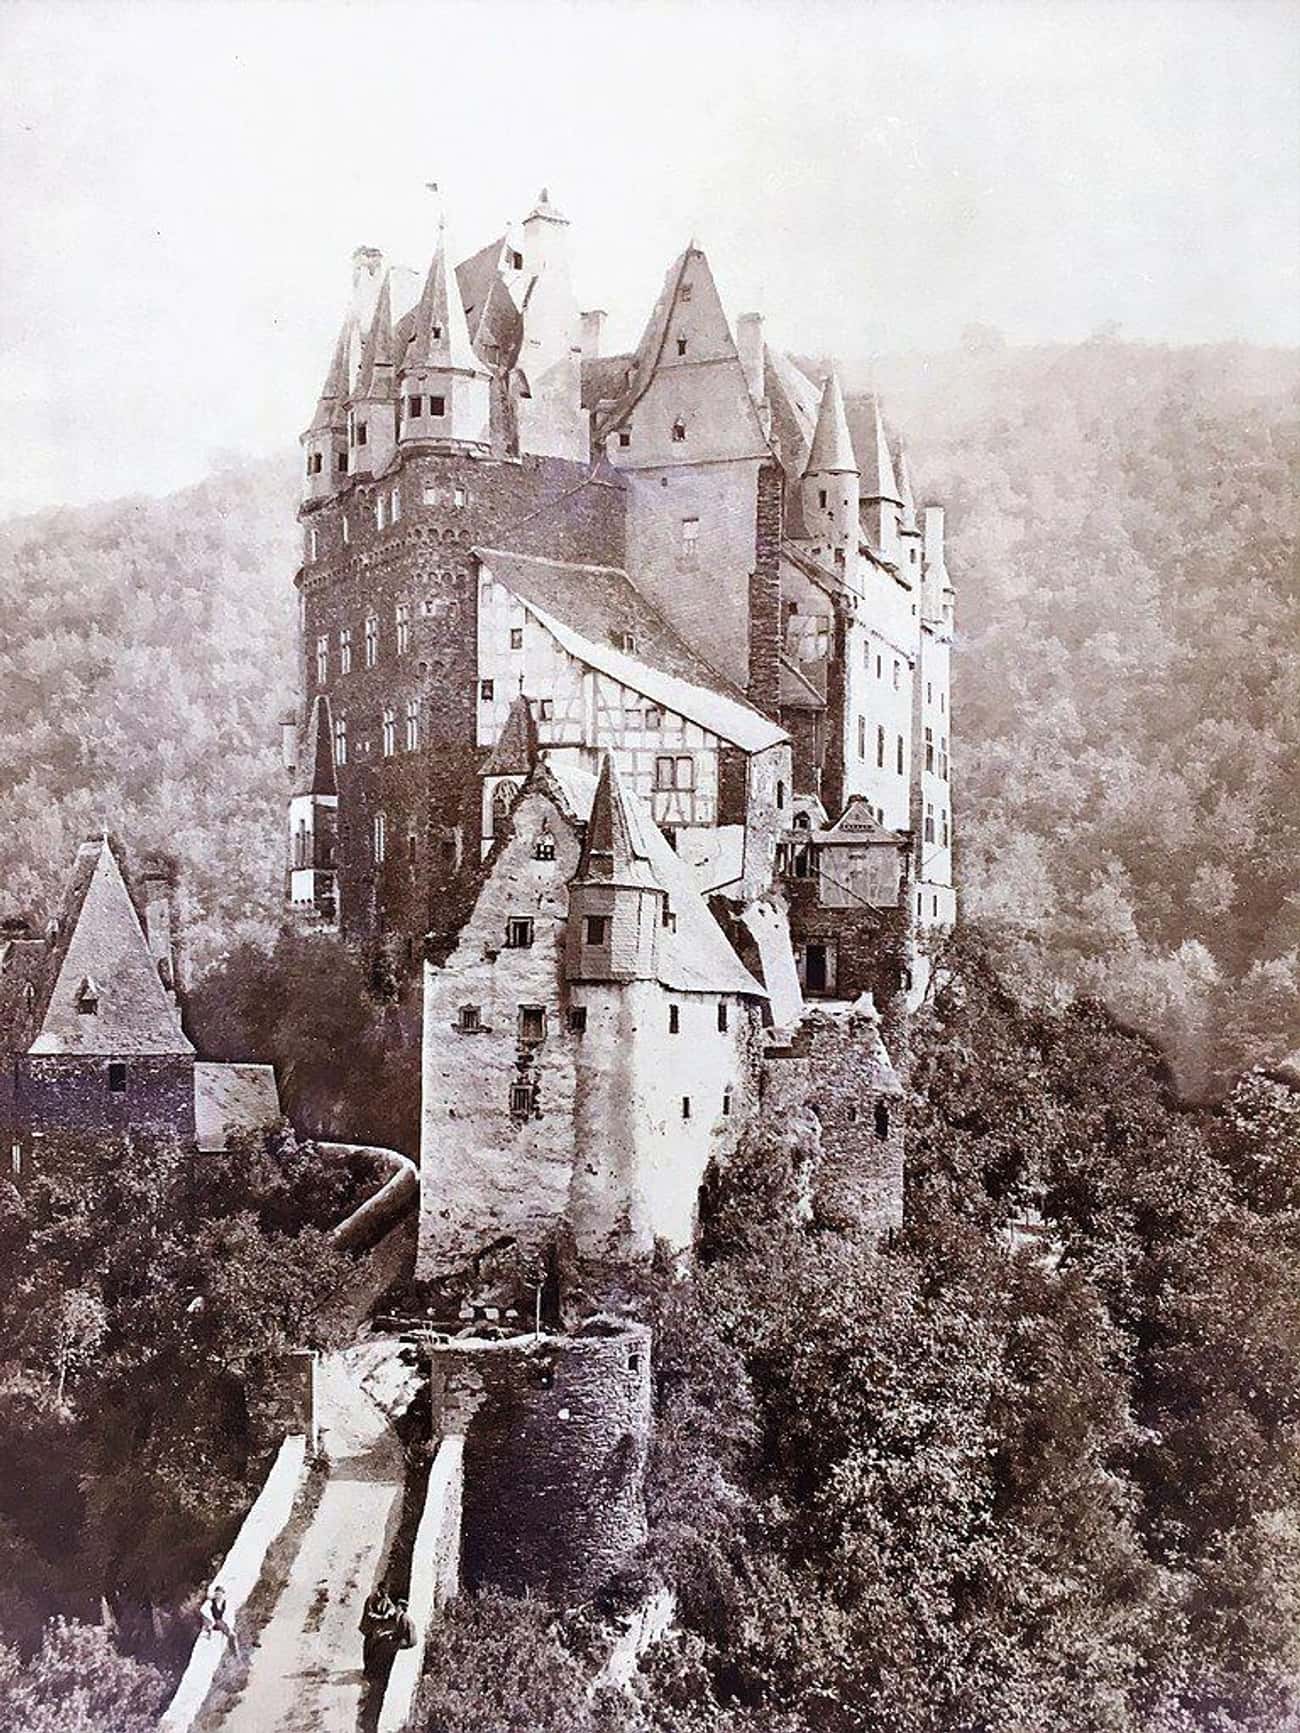 Eltz Castle Has Been Owned And Occupied By The Eltz Family For Eight Centuries